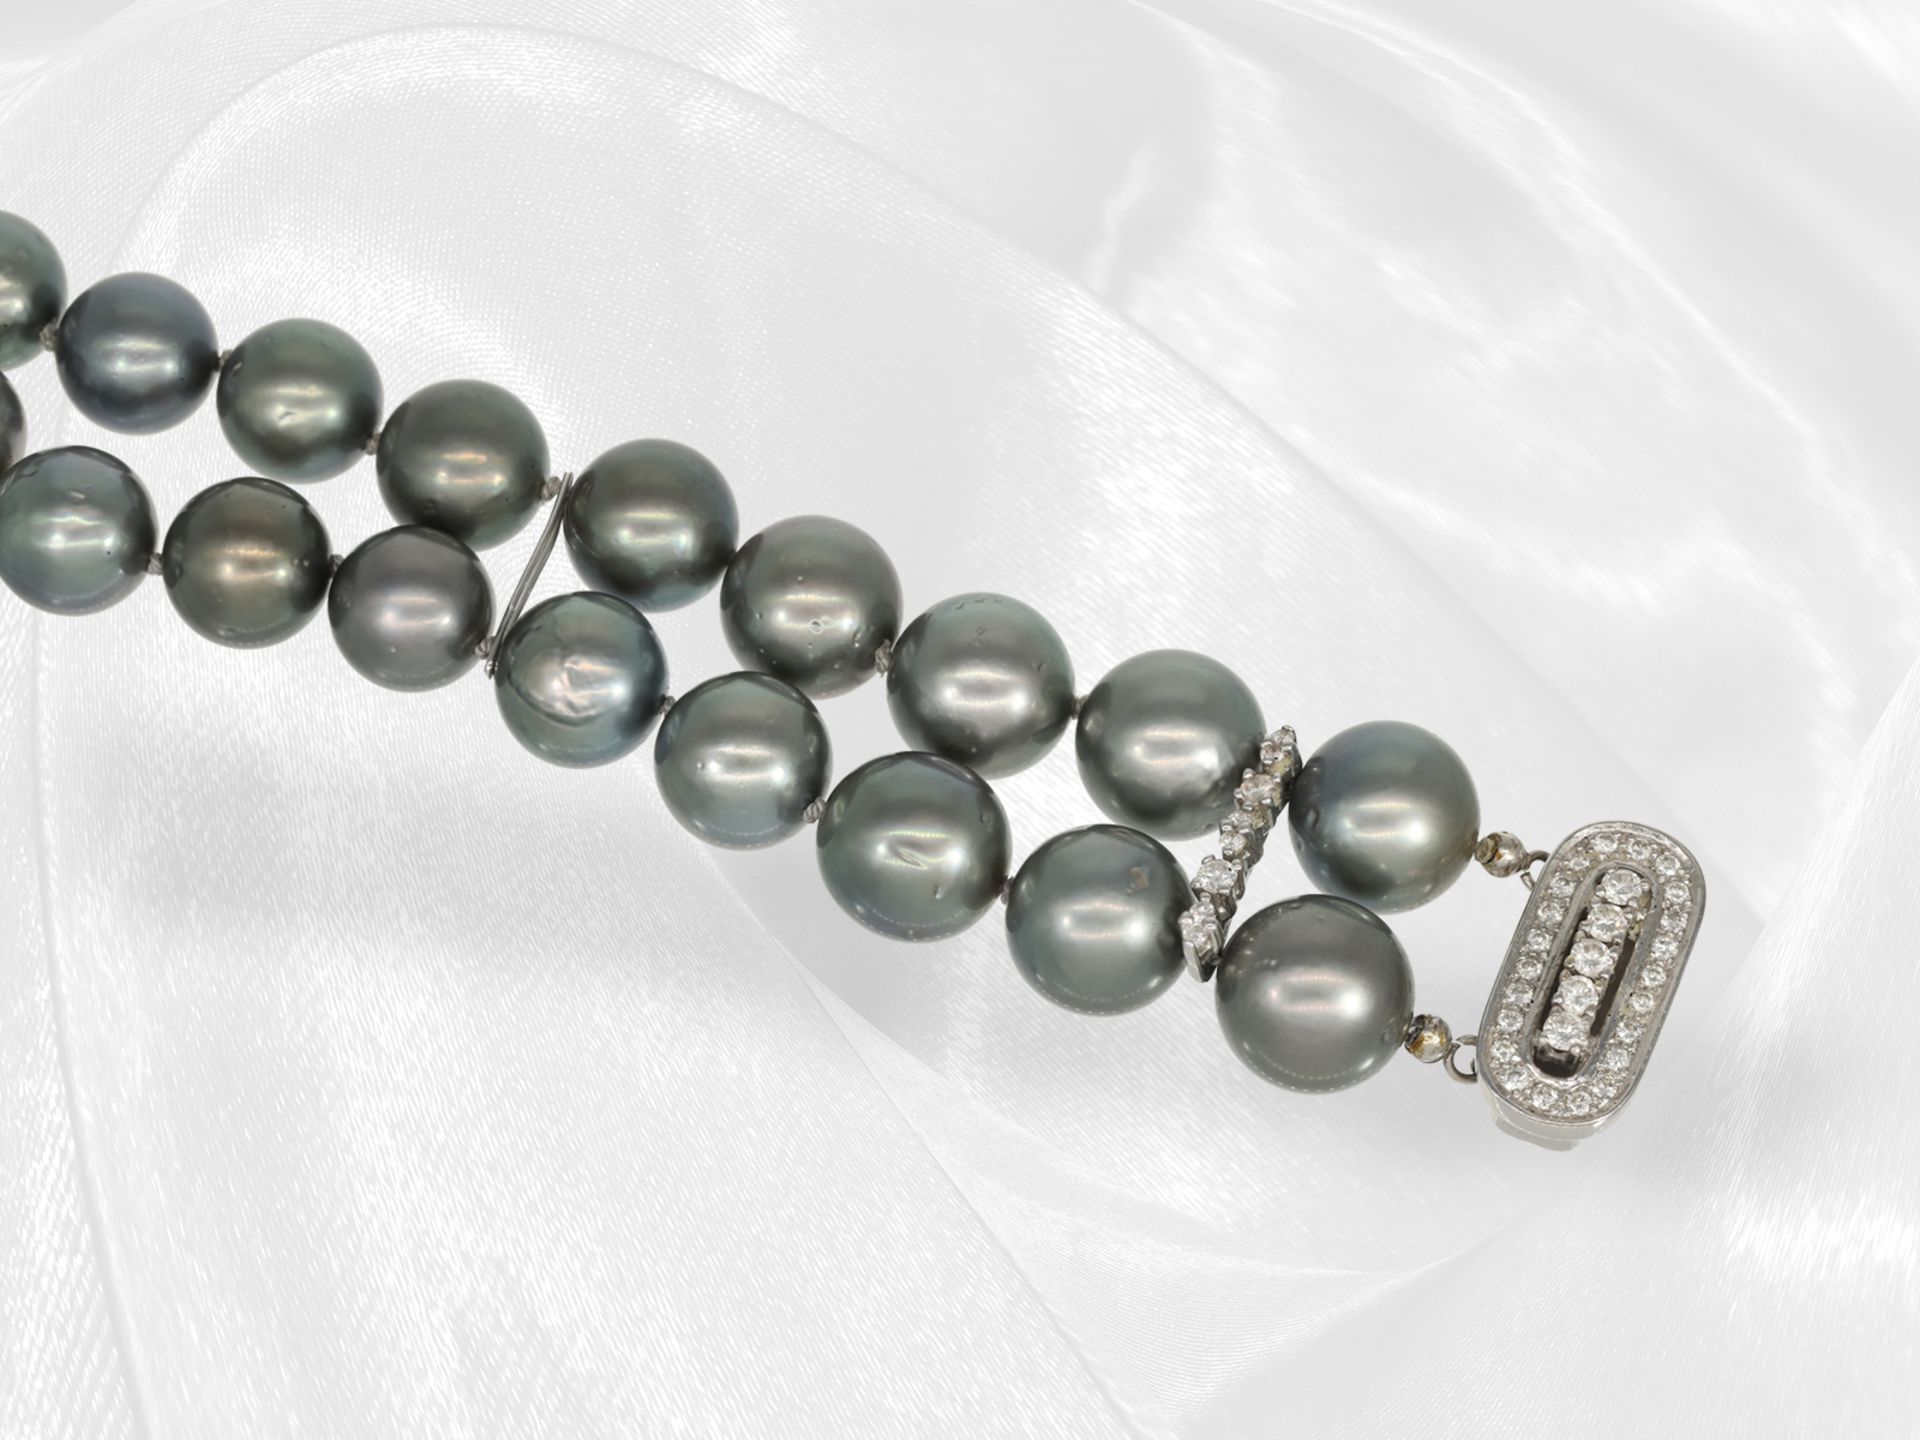 Very decorative double row Tahiti cultured pearl bracelet, 14K white gold clasp set with brilliant-c - Image 4 of 6